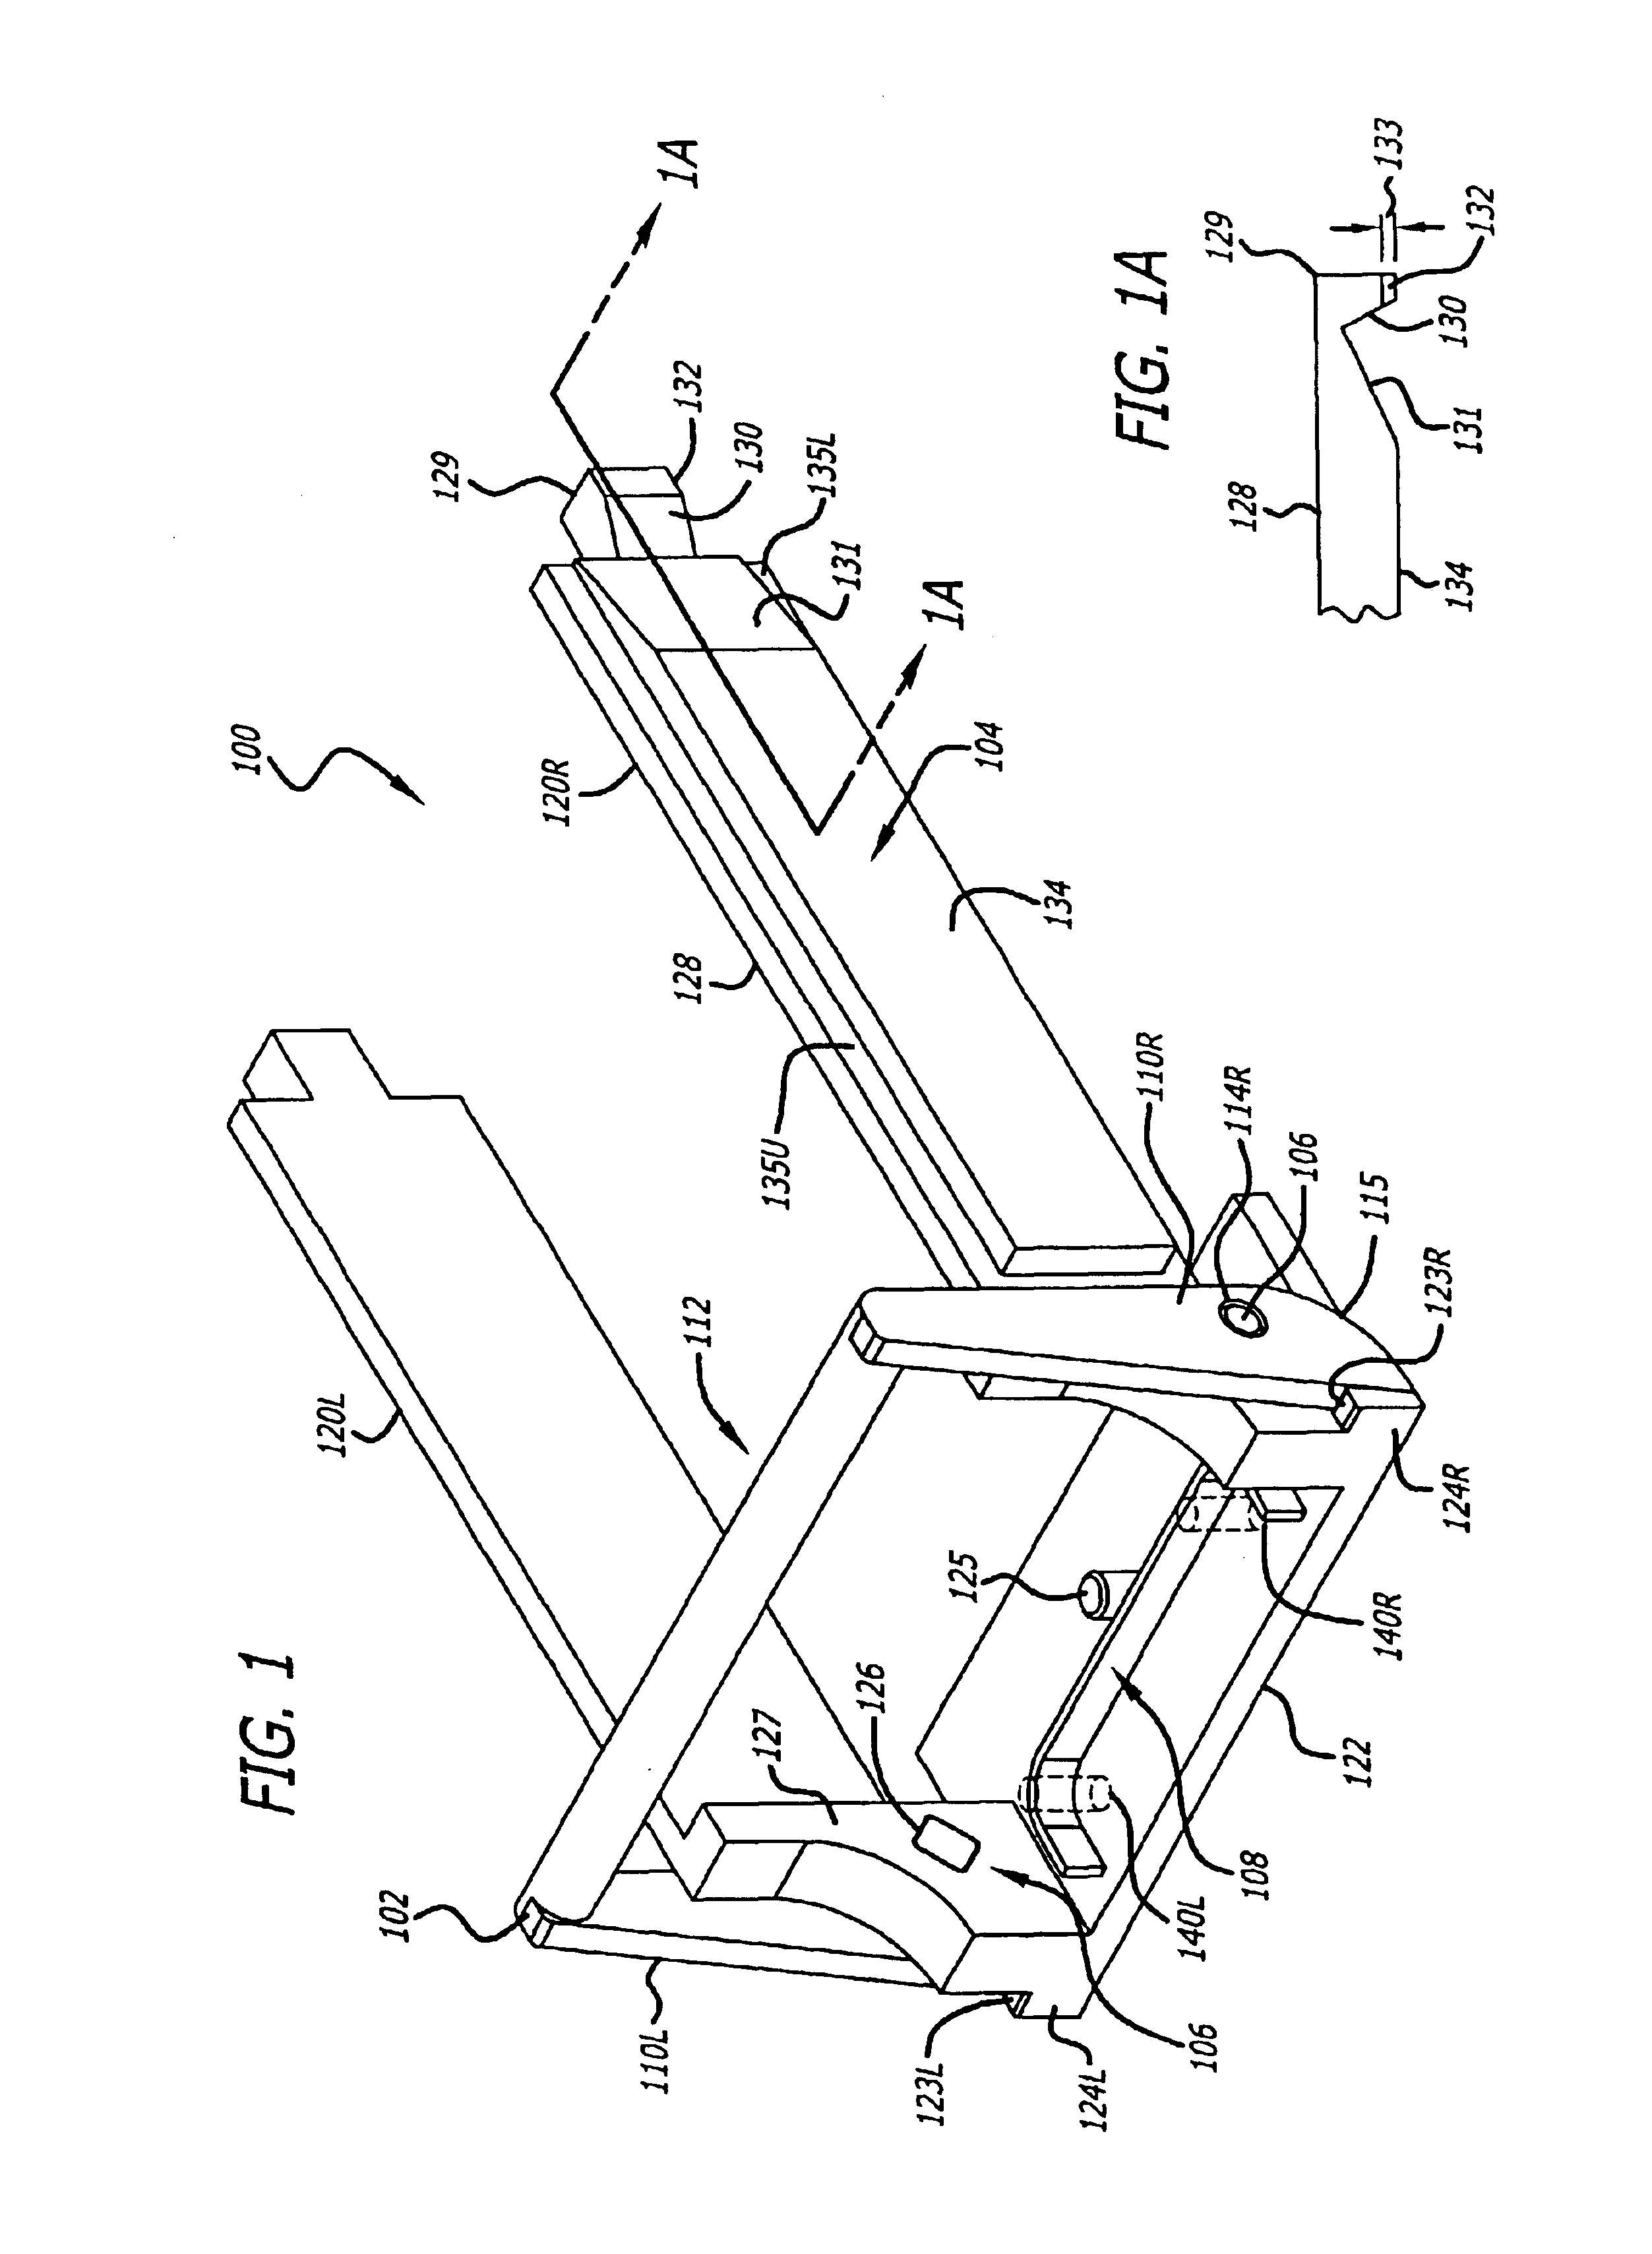 Cam-follower release mechanism for fiber optic modules with side delatching mechanisms